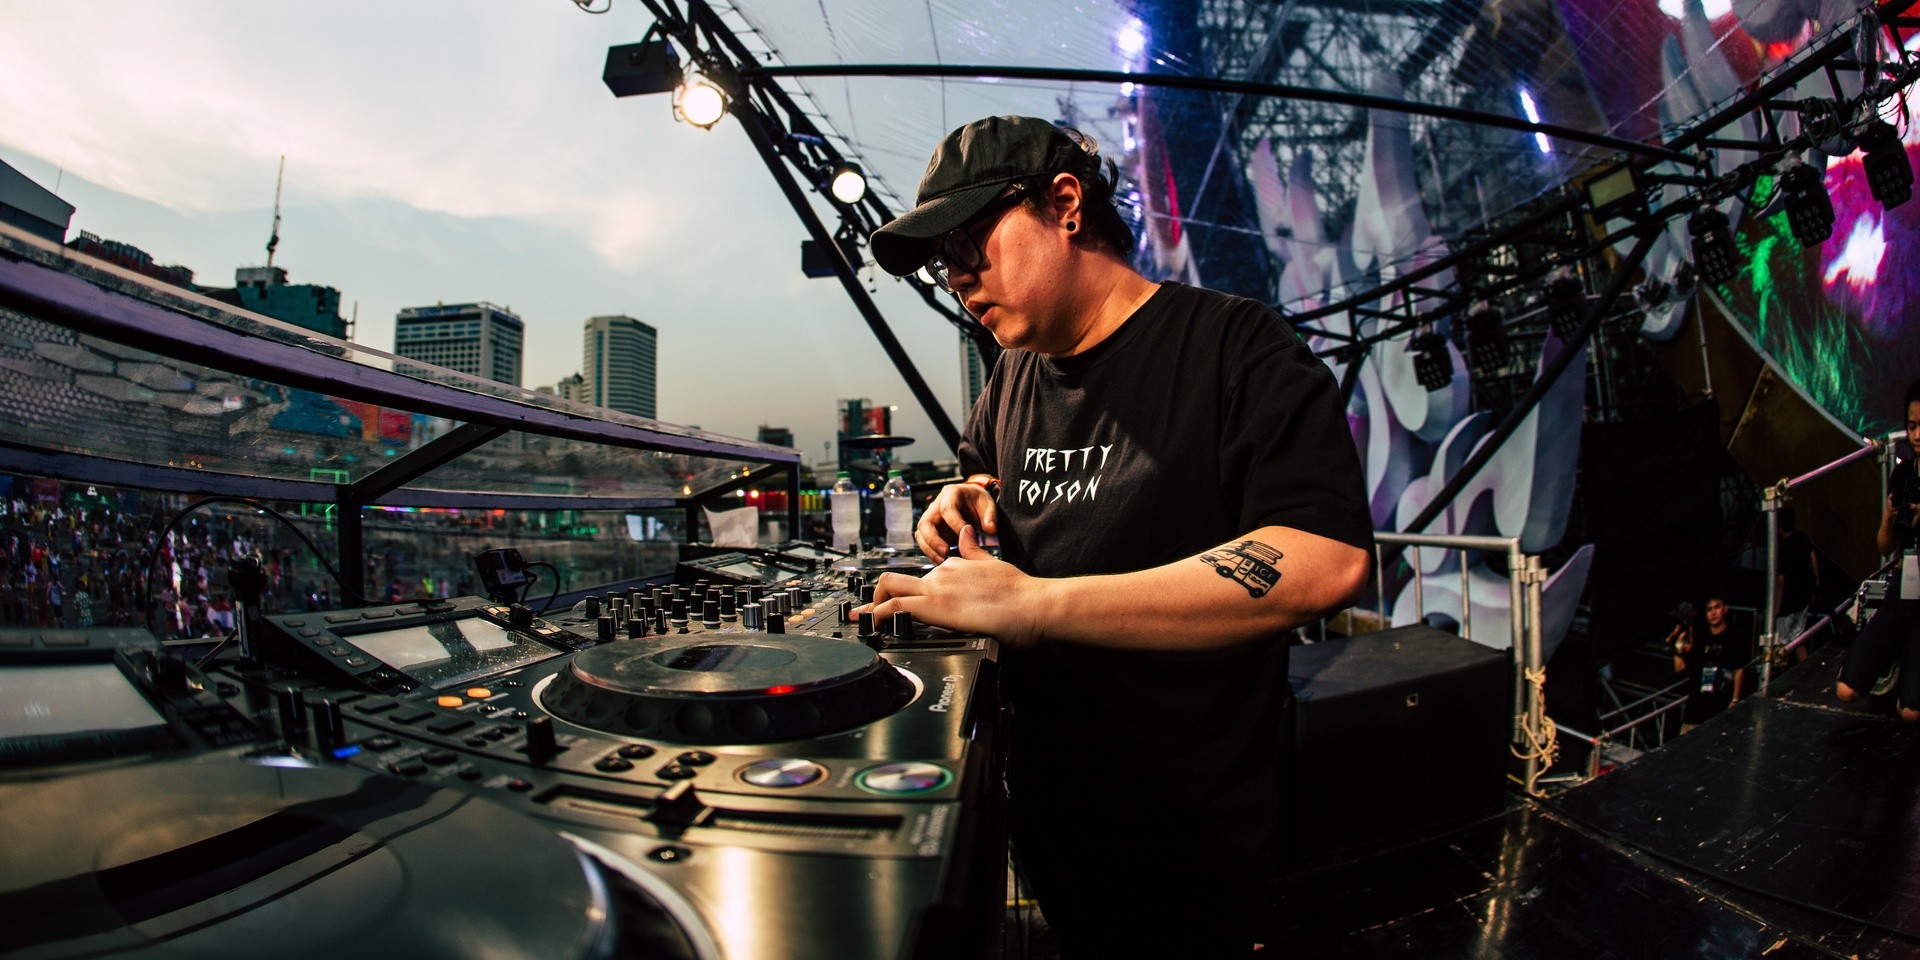 Sihk announces special all-Indonesian Tomorrowland 2019 performance